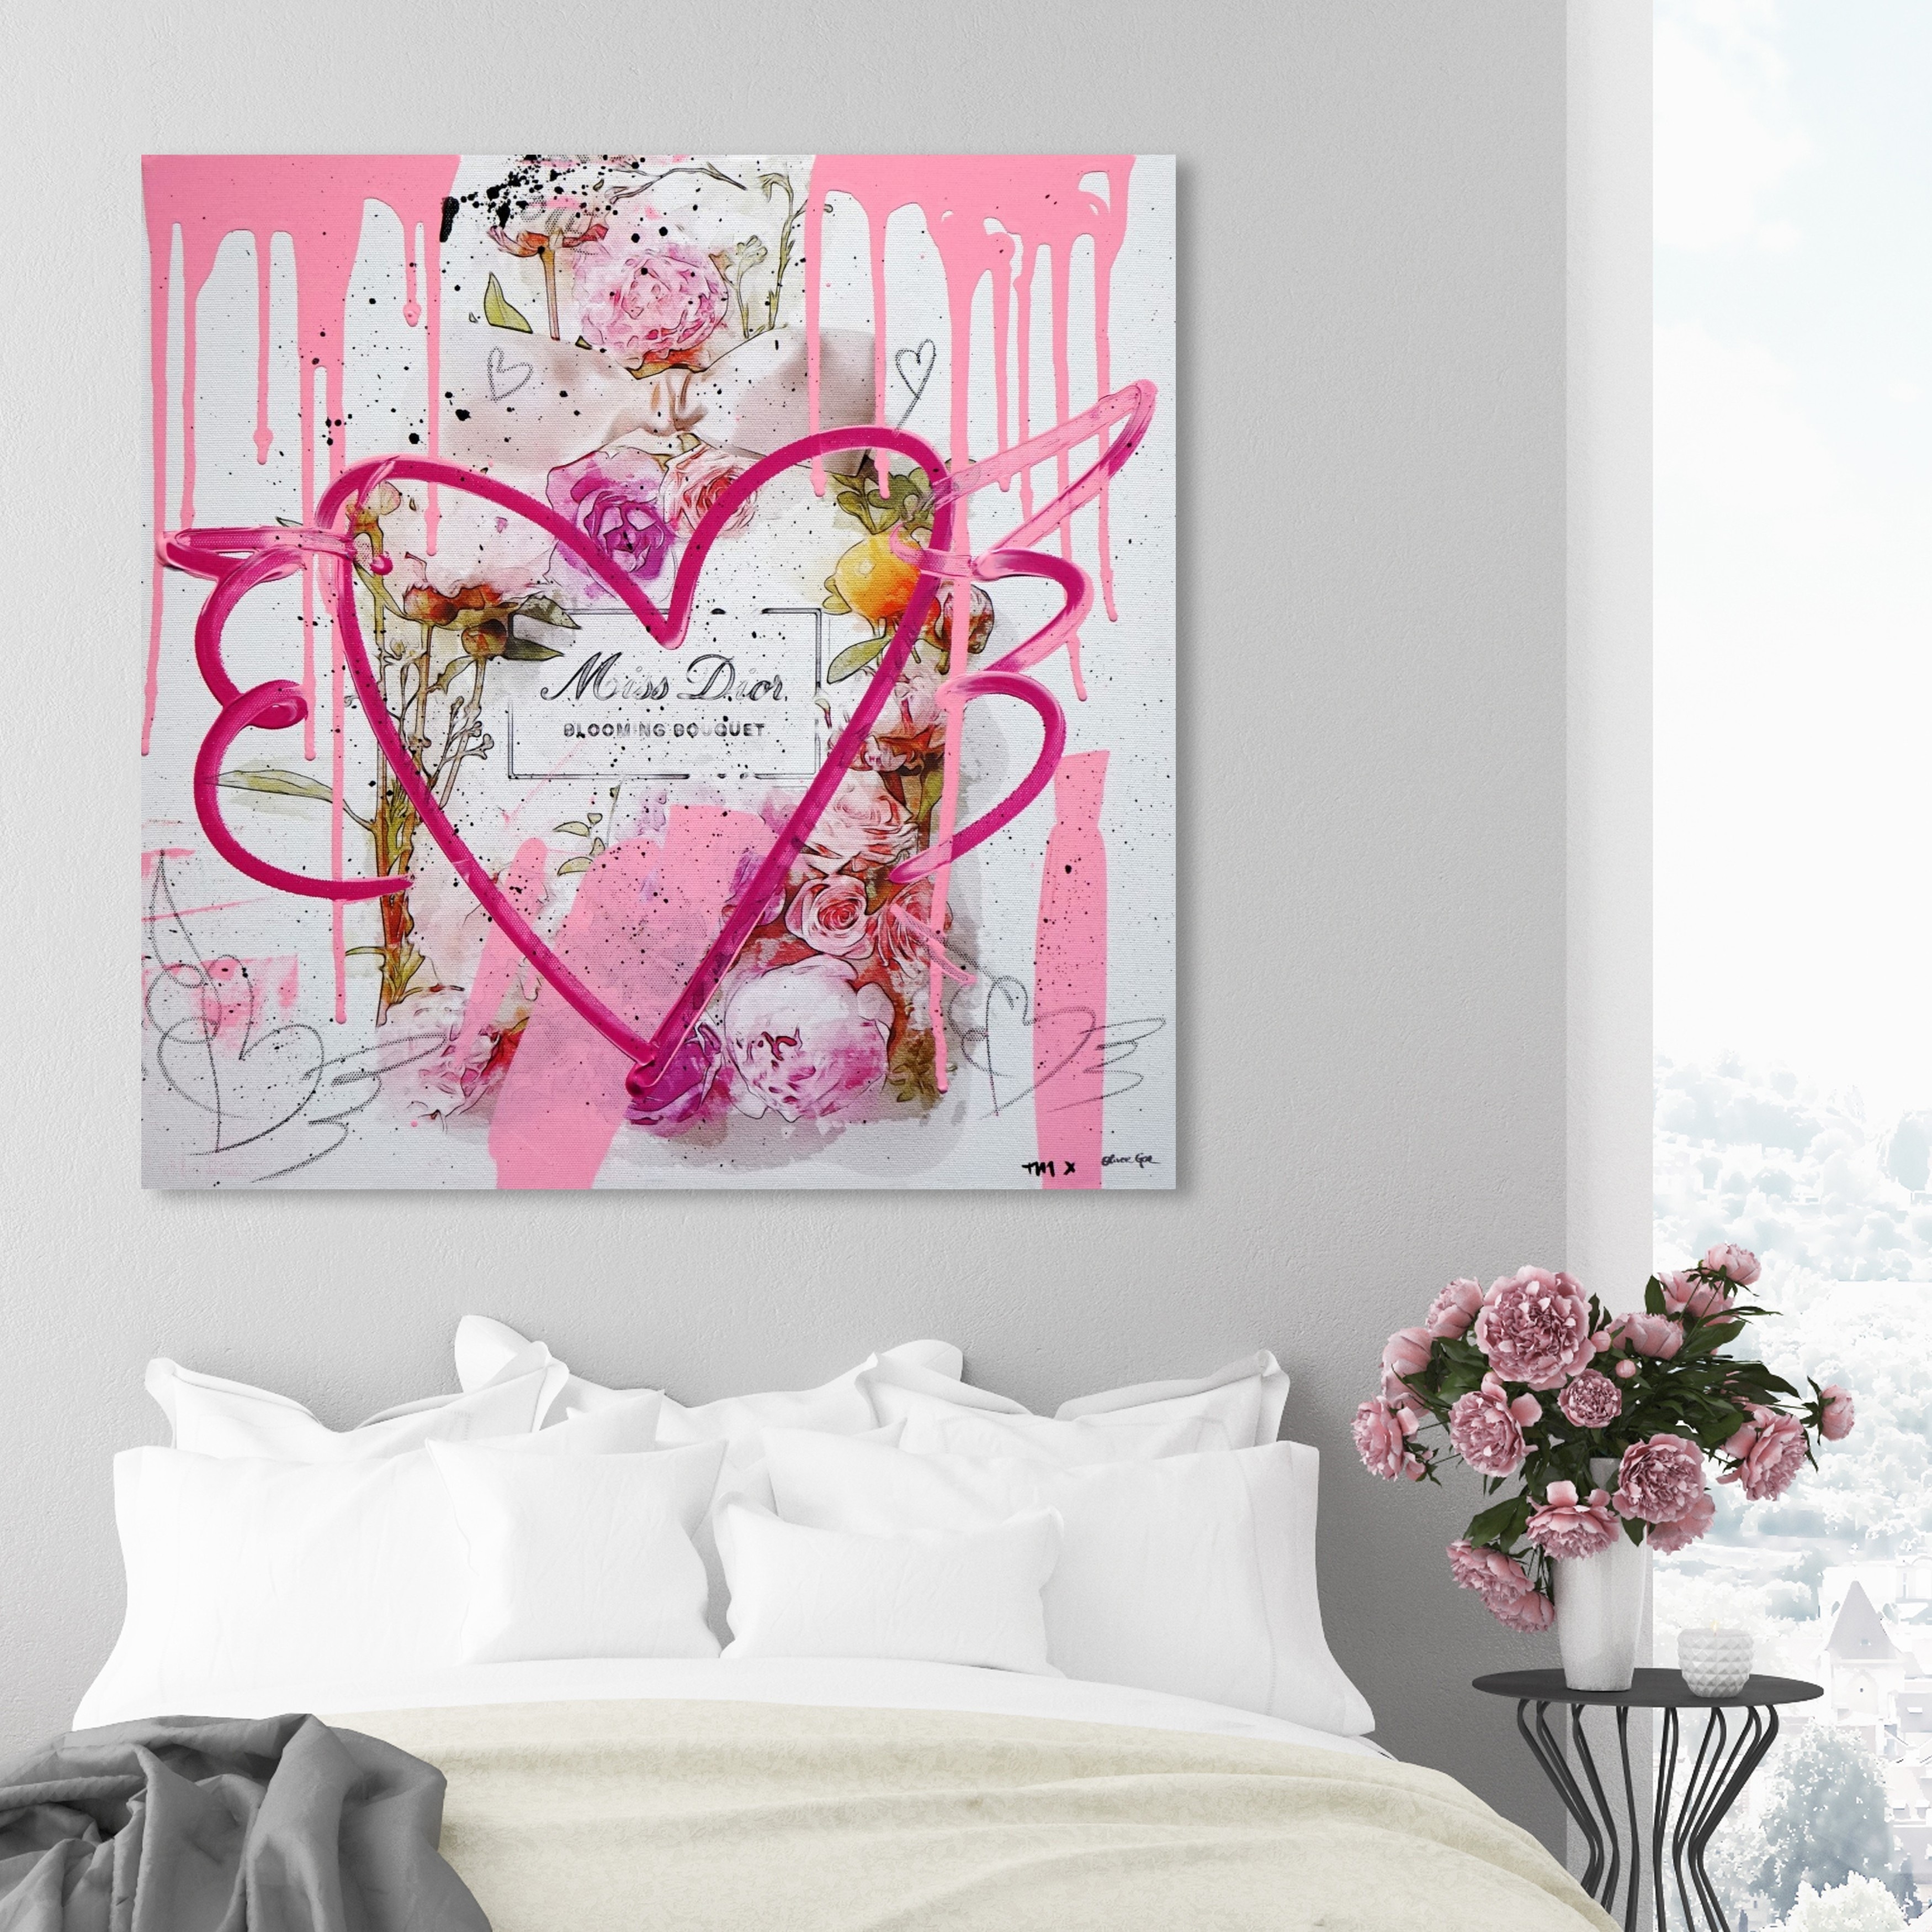 Oliver Gal Fashion and Glam Wall Art Canvas Prints 'Bouquet Remix' Perfumes  - Pink, White - Bed Bath & Beyond - 30765481